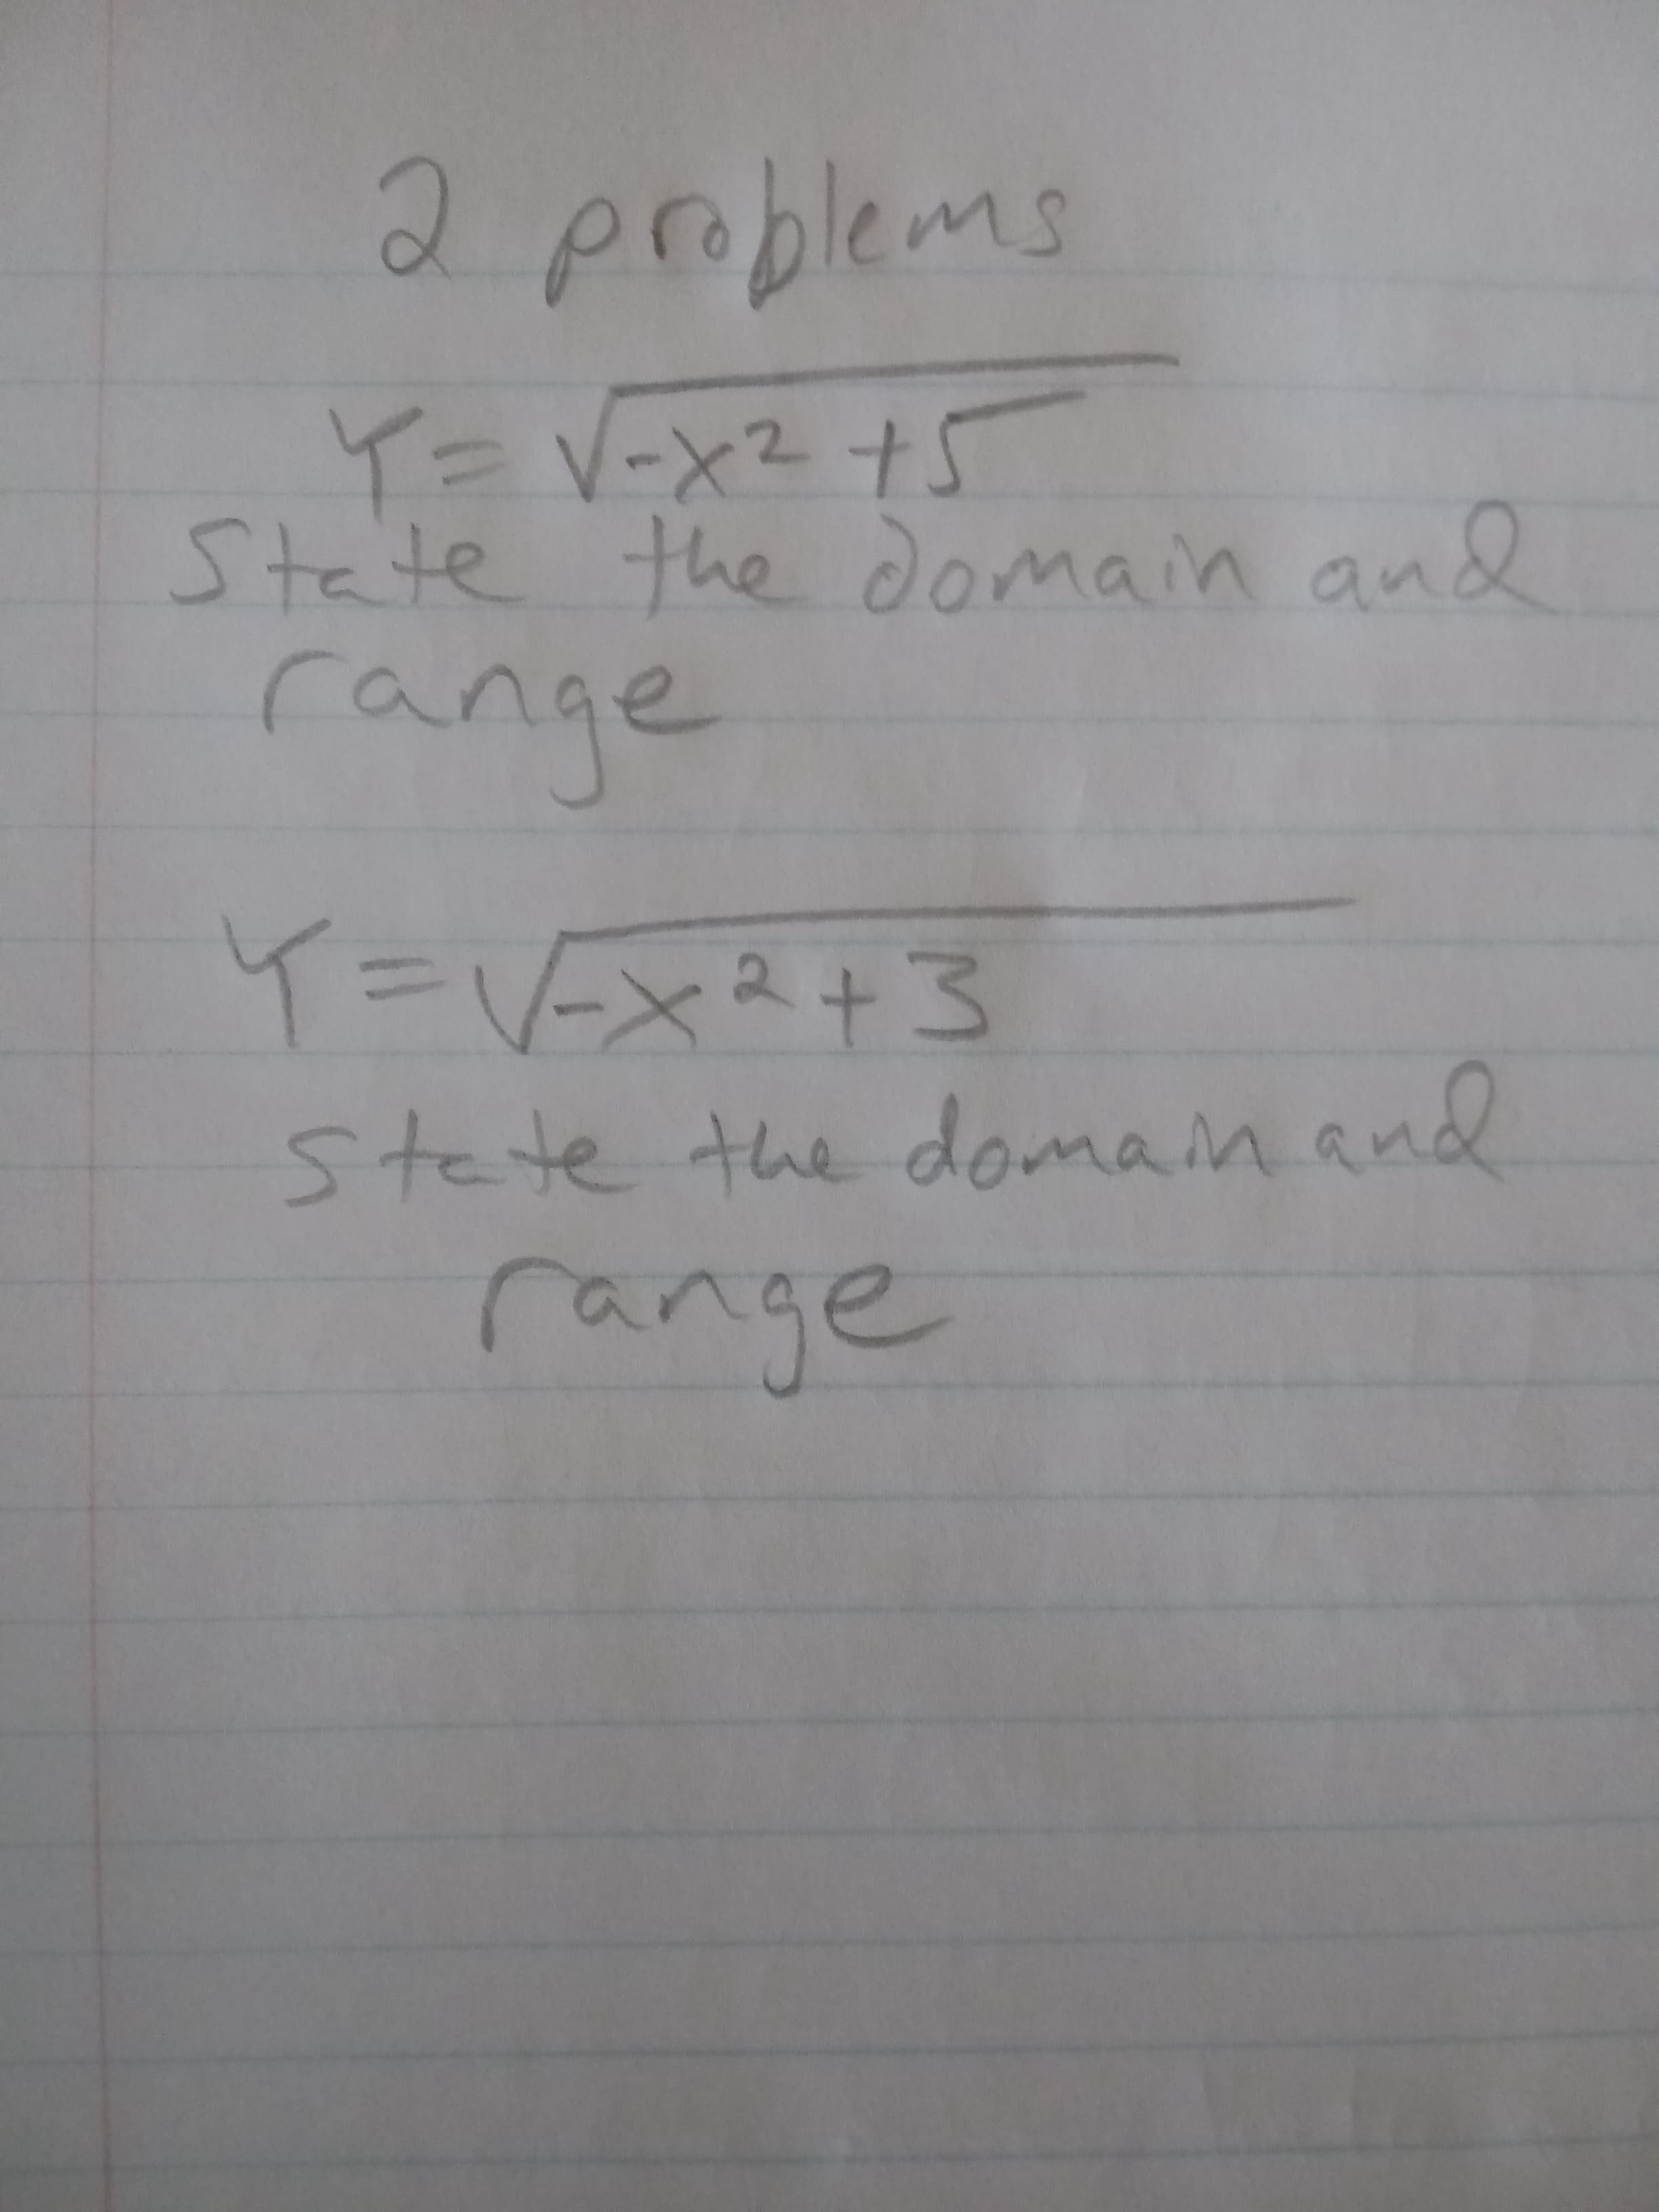 2problems
-x2+5
State the domain and
9.
range
イ=V5x2+3
stete the domain and
range
